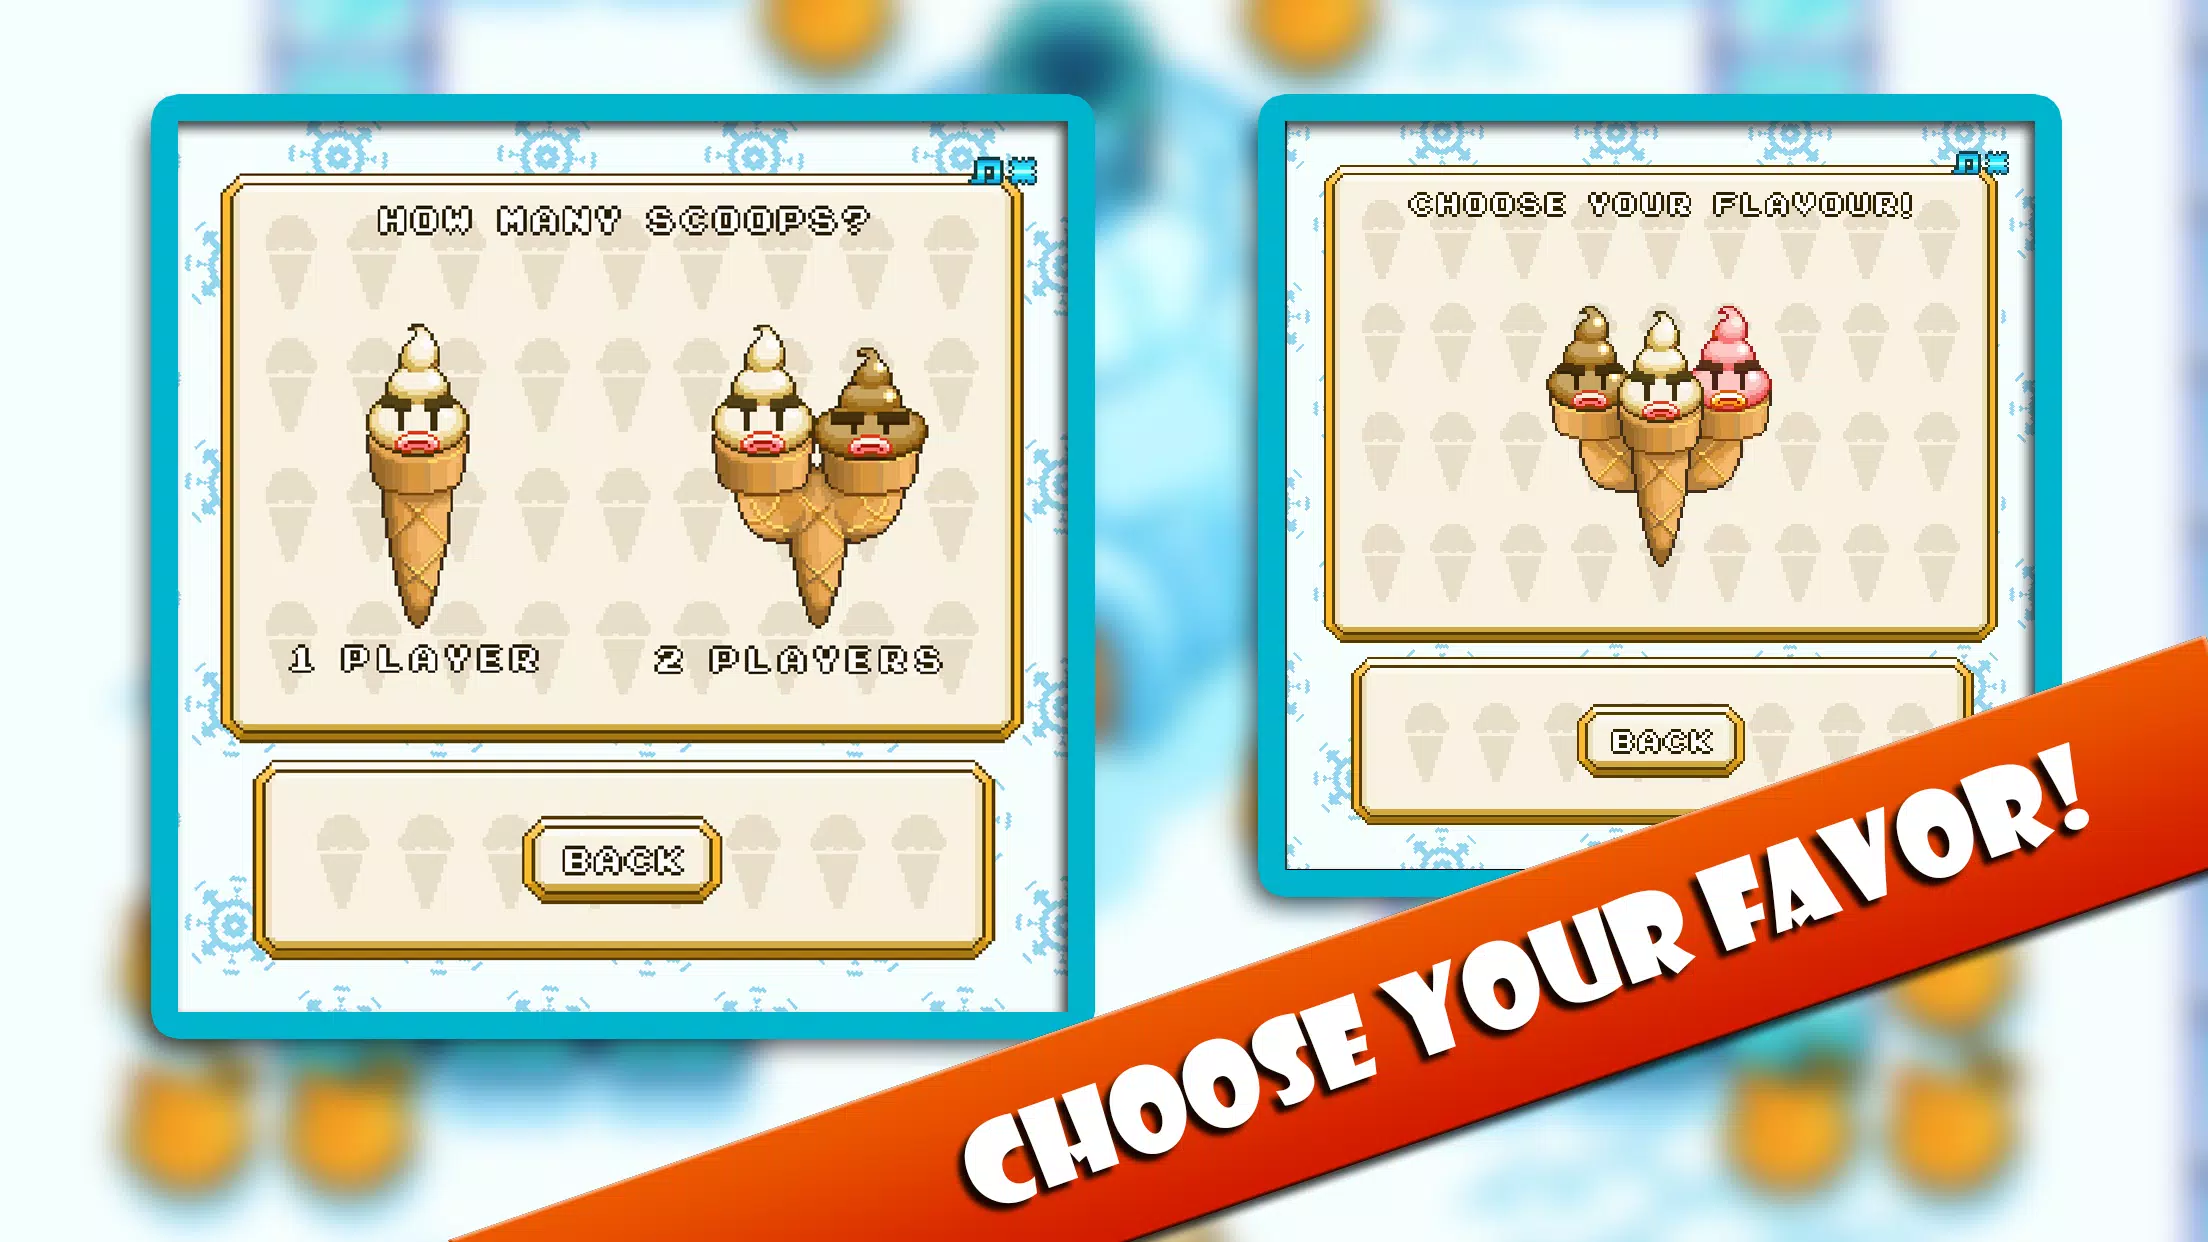 Bad Ice Cream - free multi player game available at GoGy